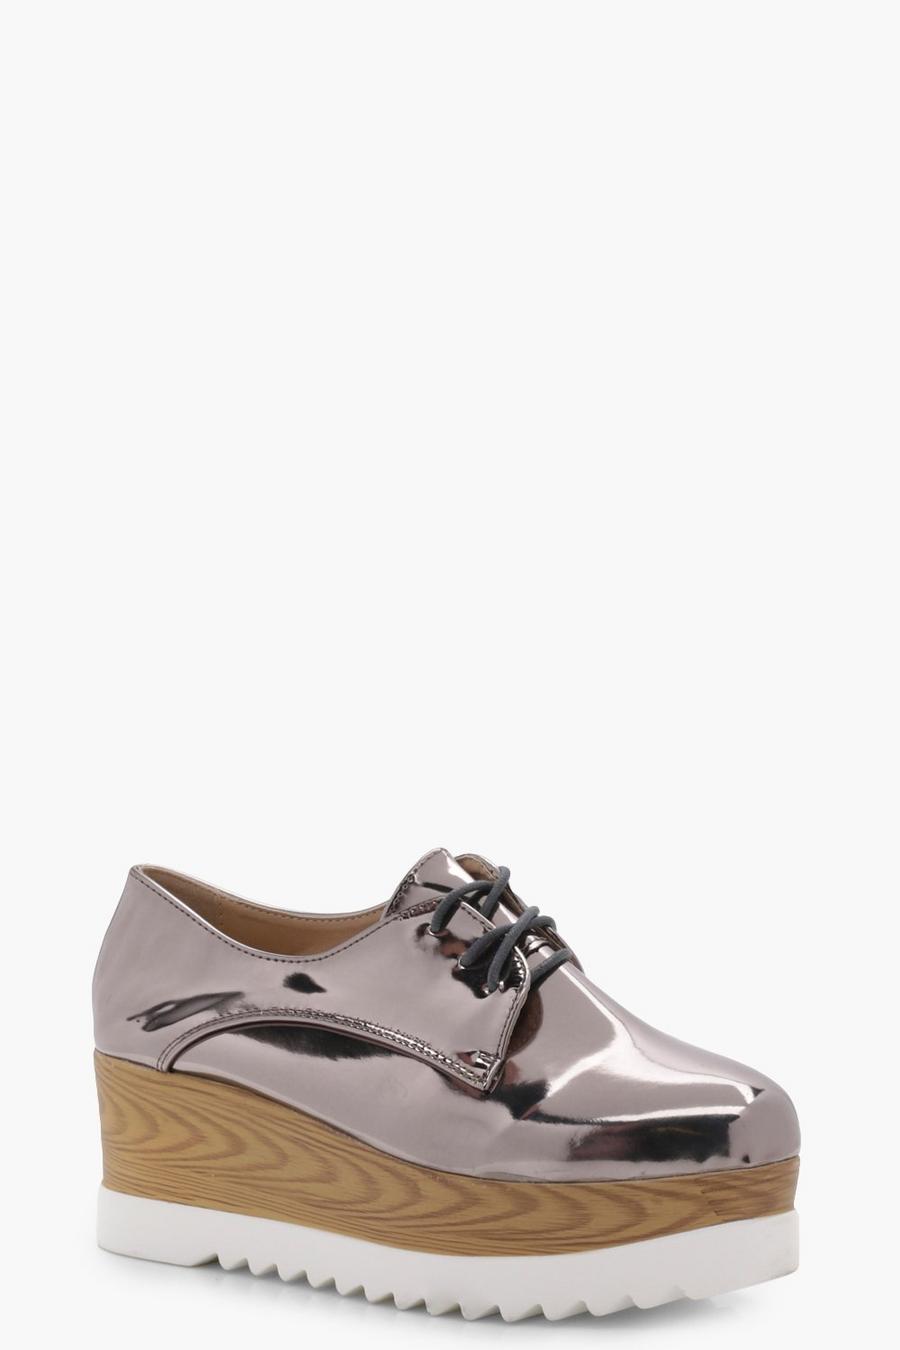 Pewter Nicole Cleated Platform Brogues image number 1